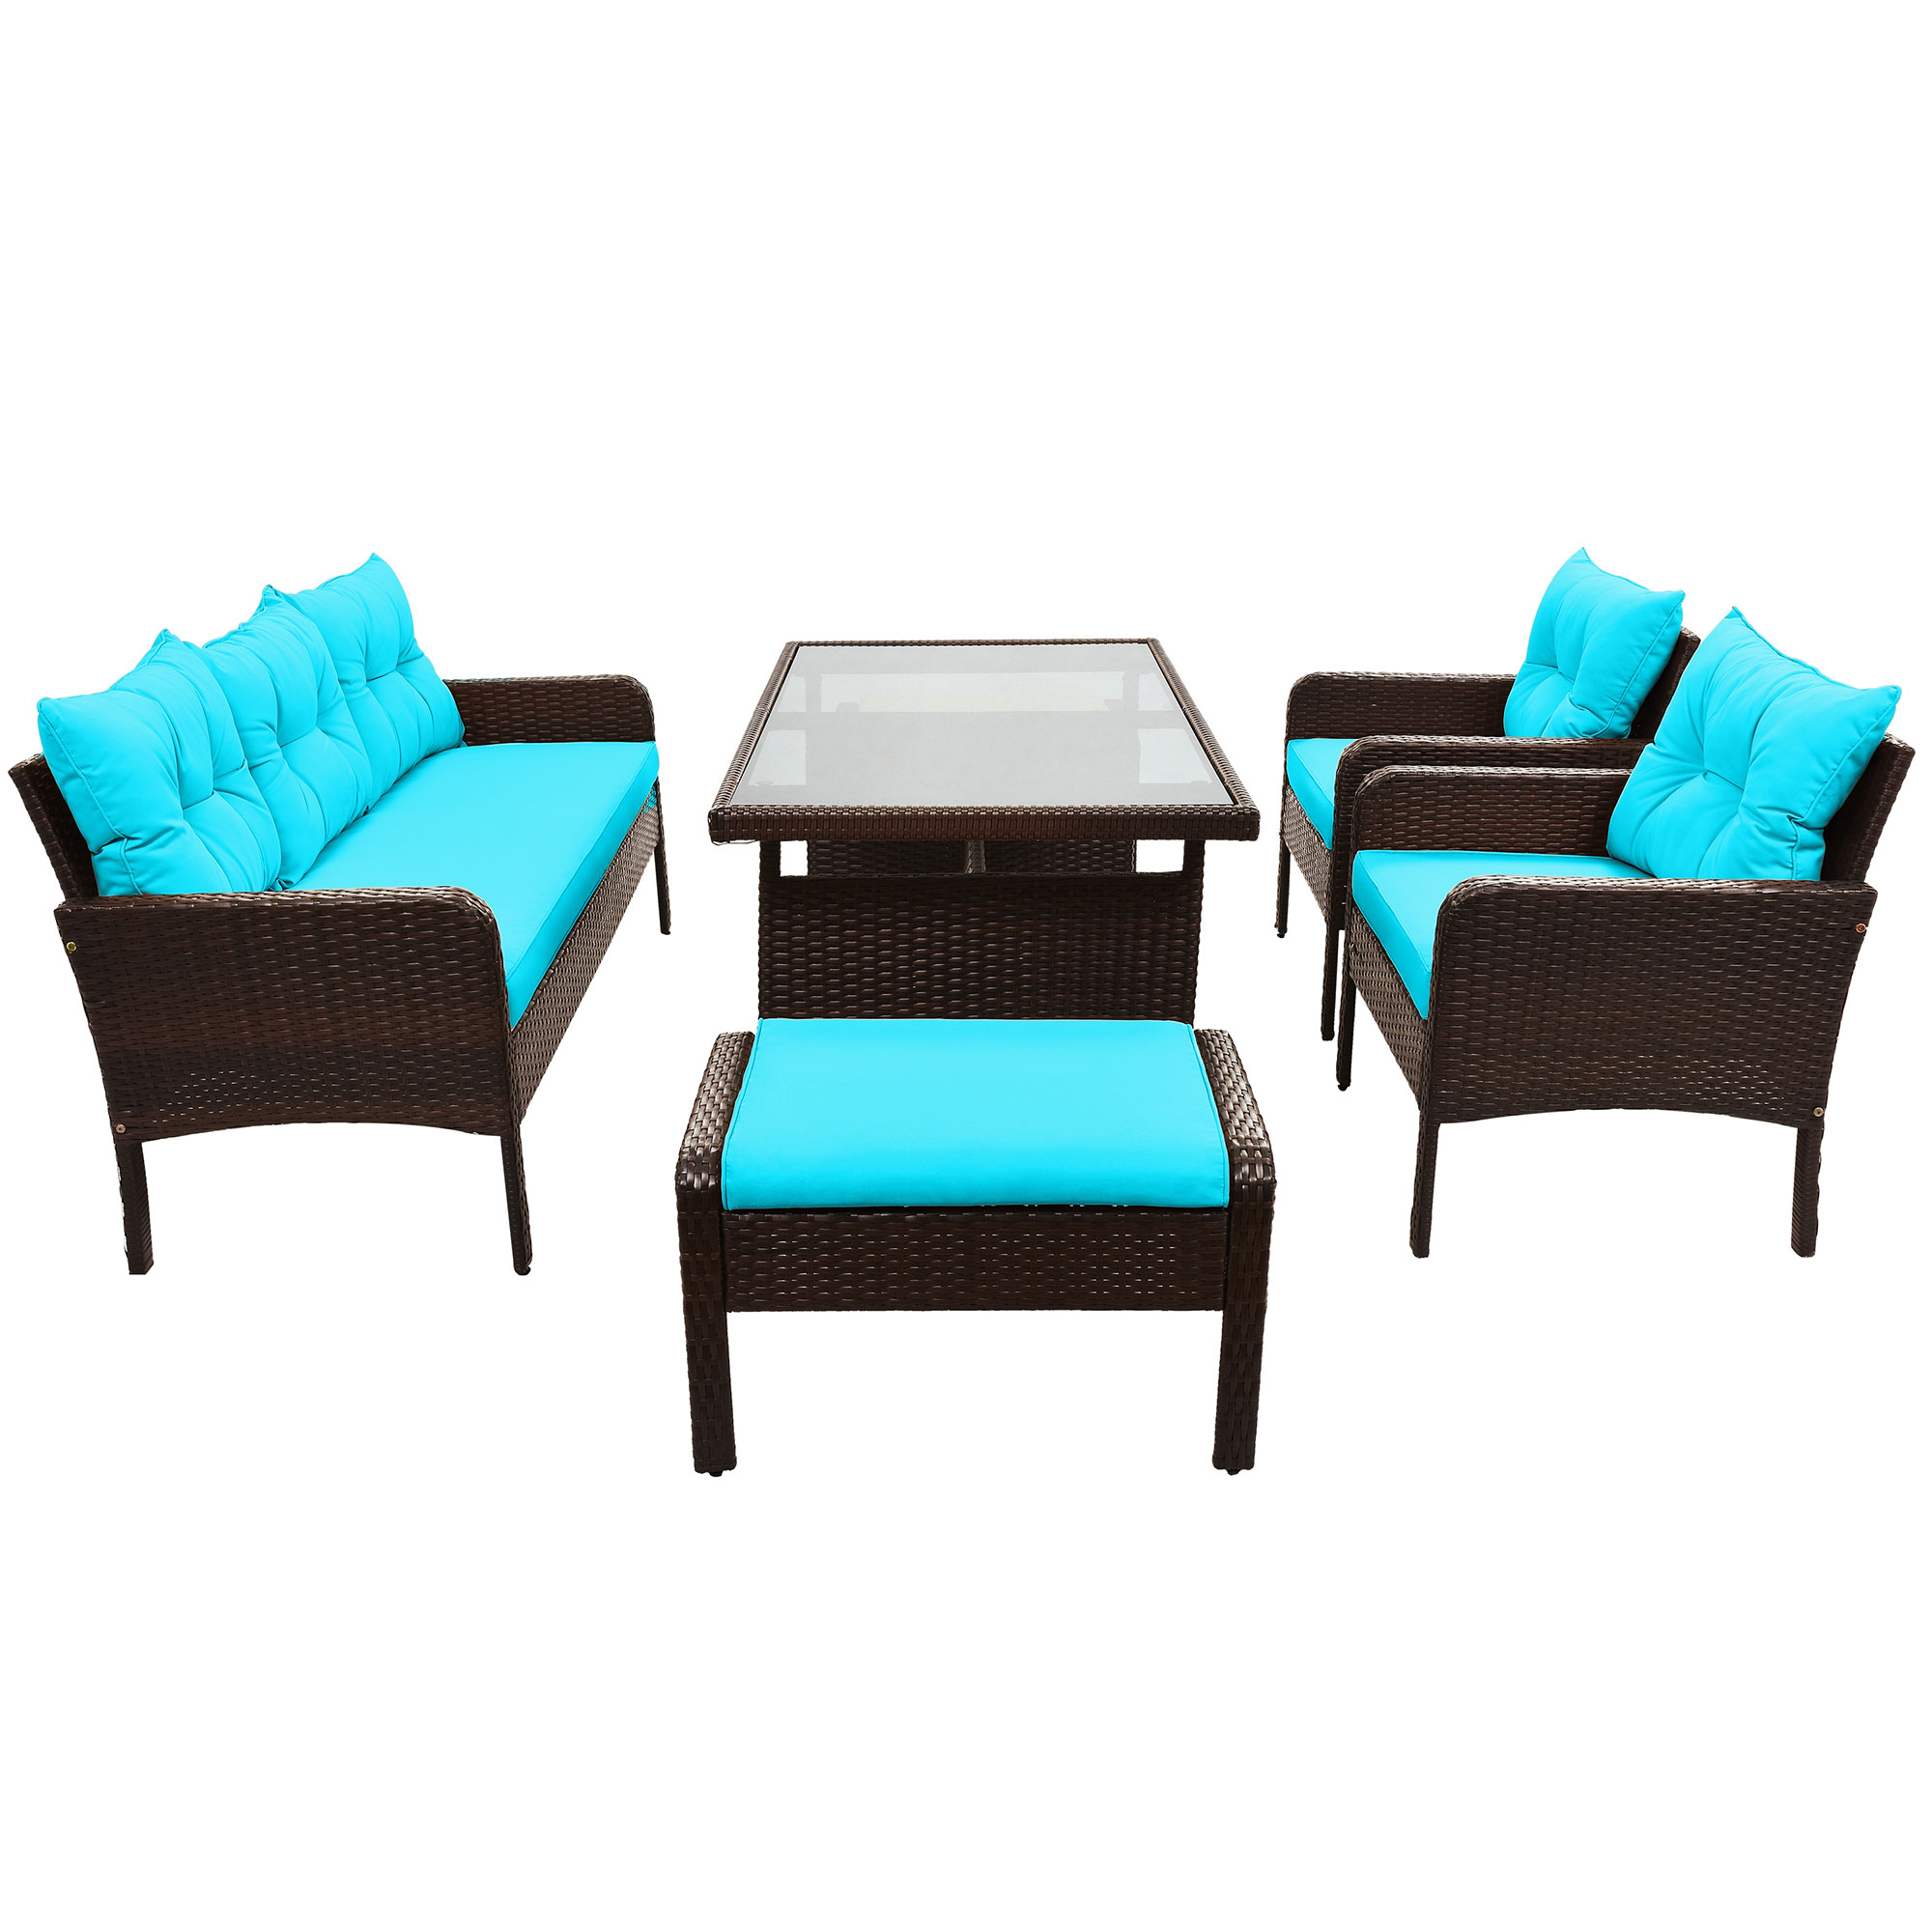 Outdoor Wicker Furniture Set, SYNGAR 6 Piece Patio Sectional Sofa Sets with Ottomans, Outdoor All Weather Wicker Conversation Chairs Set with Tea Table & Cushions, for Yard, Pool, Deck, Blue, D8520 - image 3 of 10